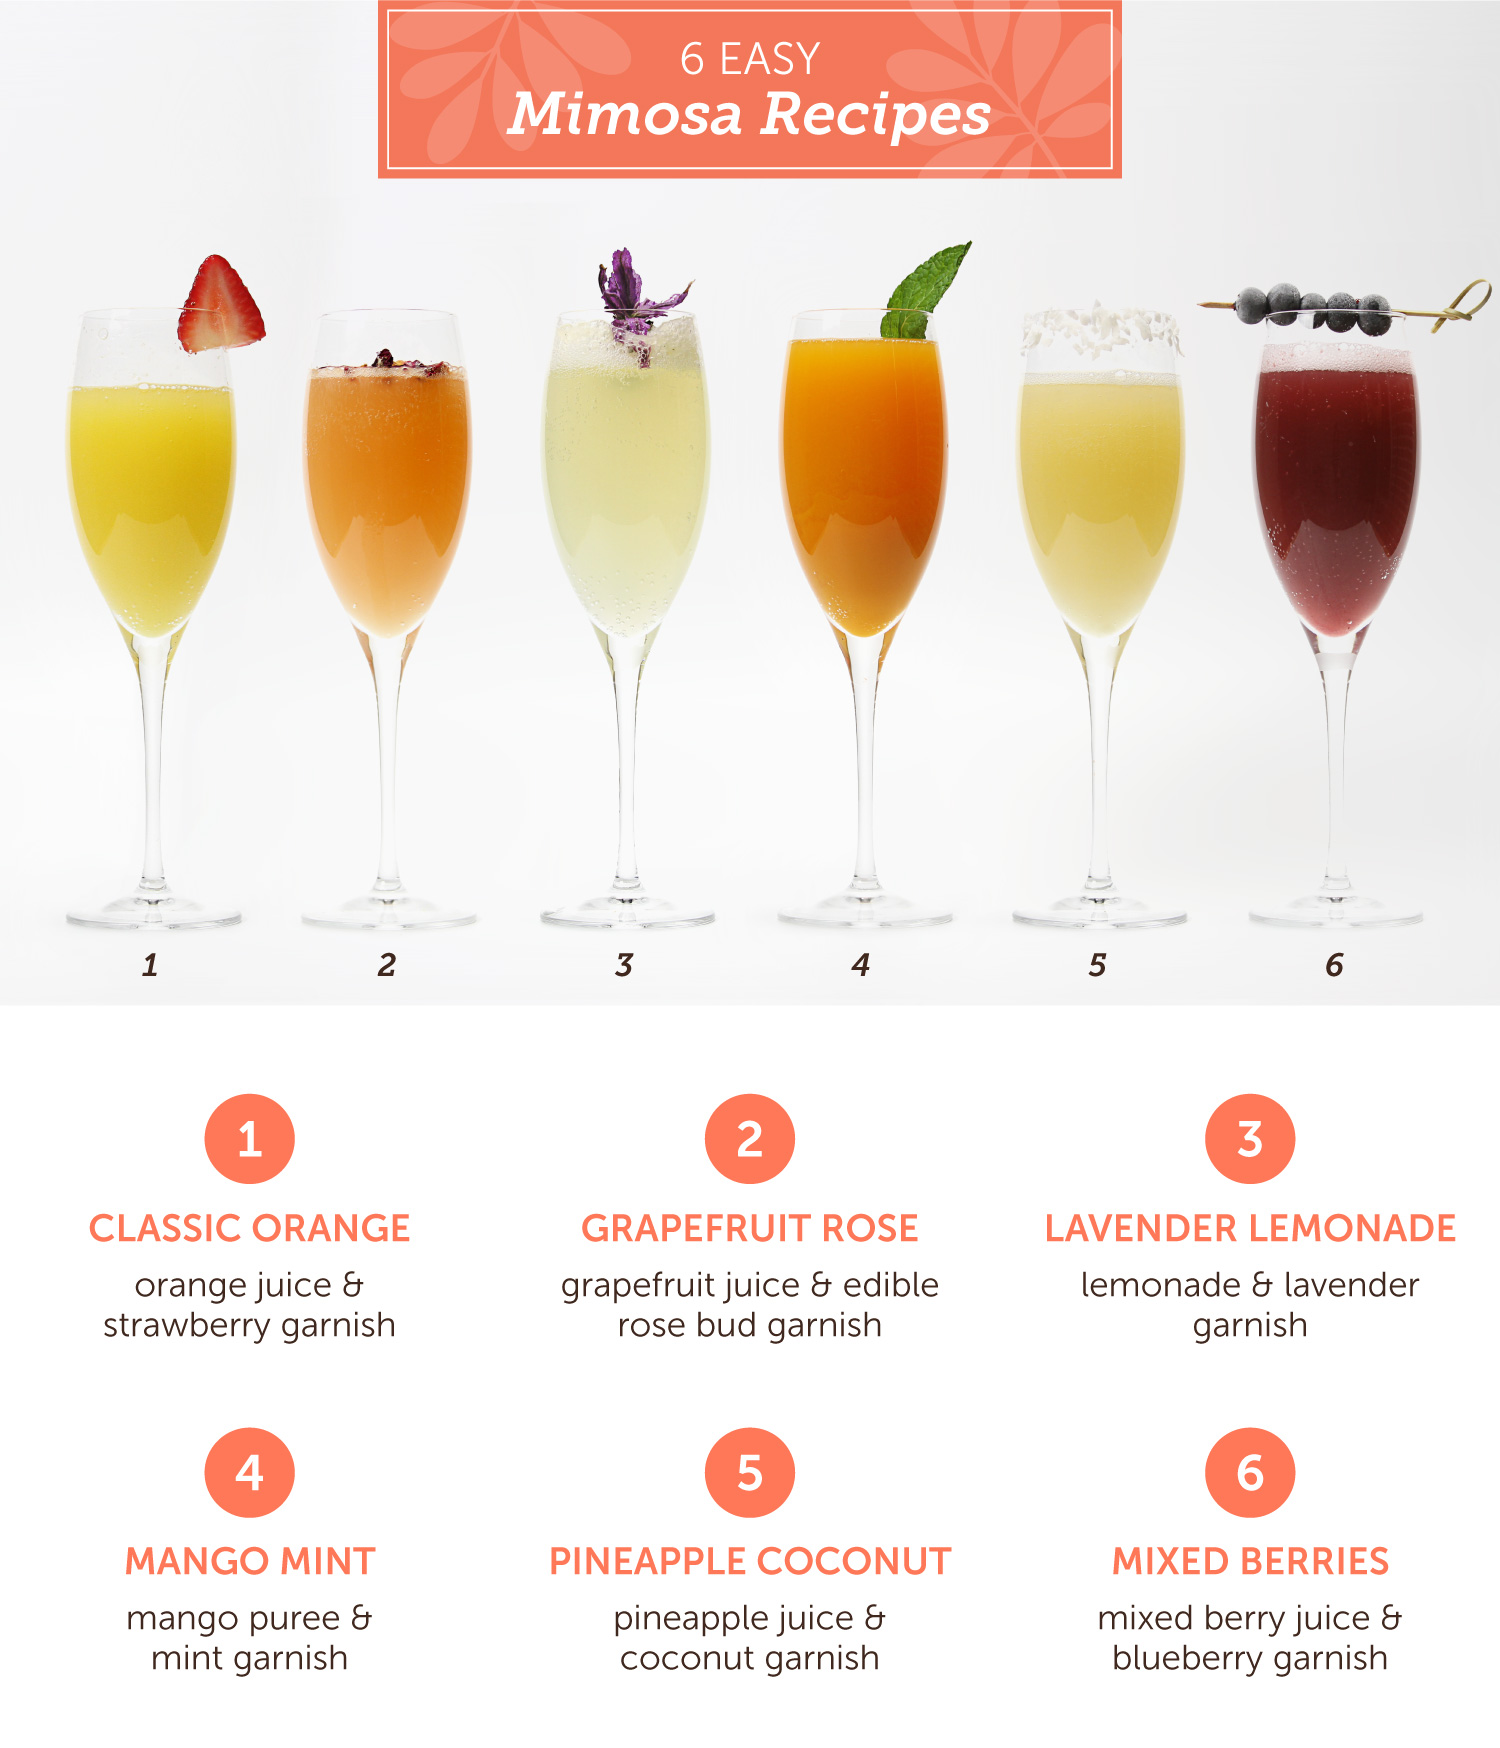 Classic Mimosa Recipe - How To Make An Easy Mimosa